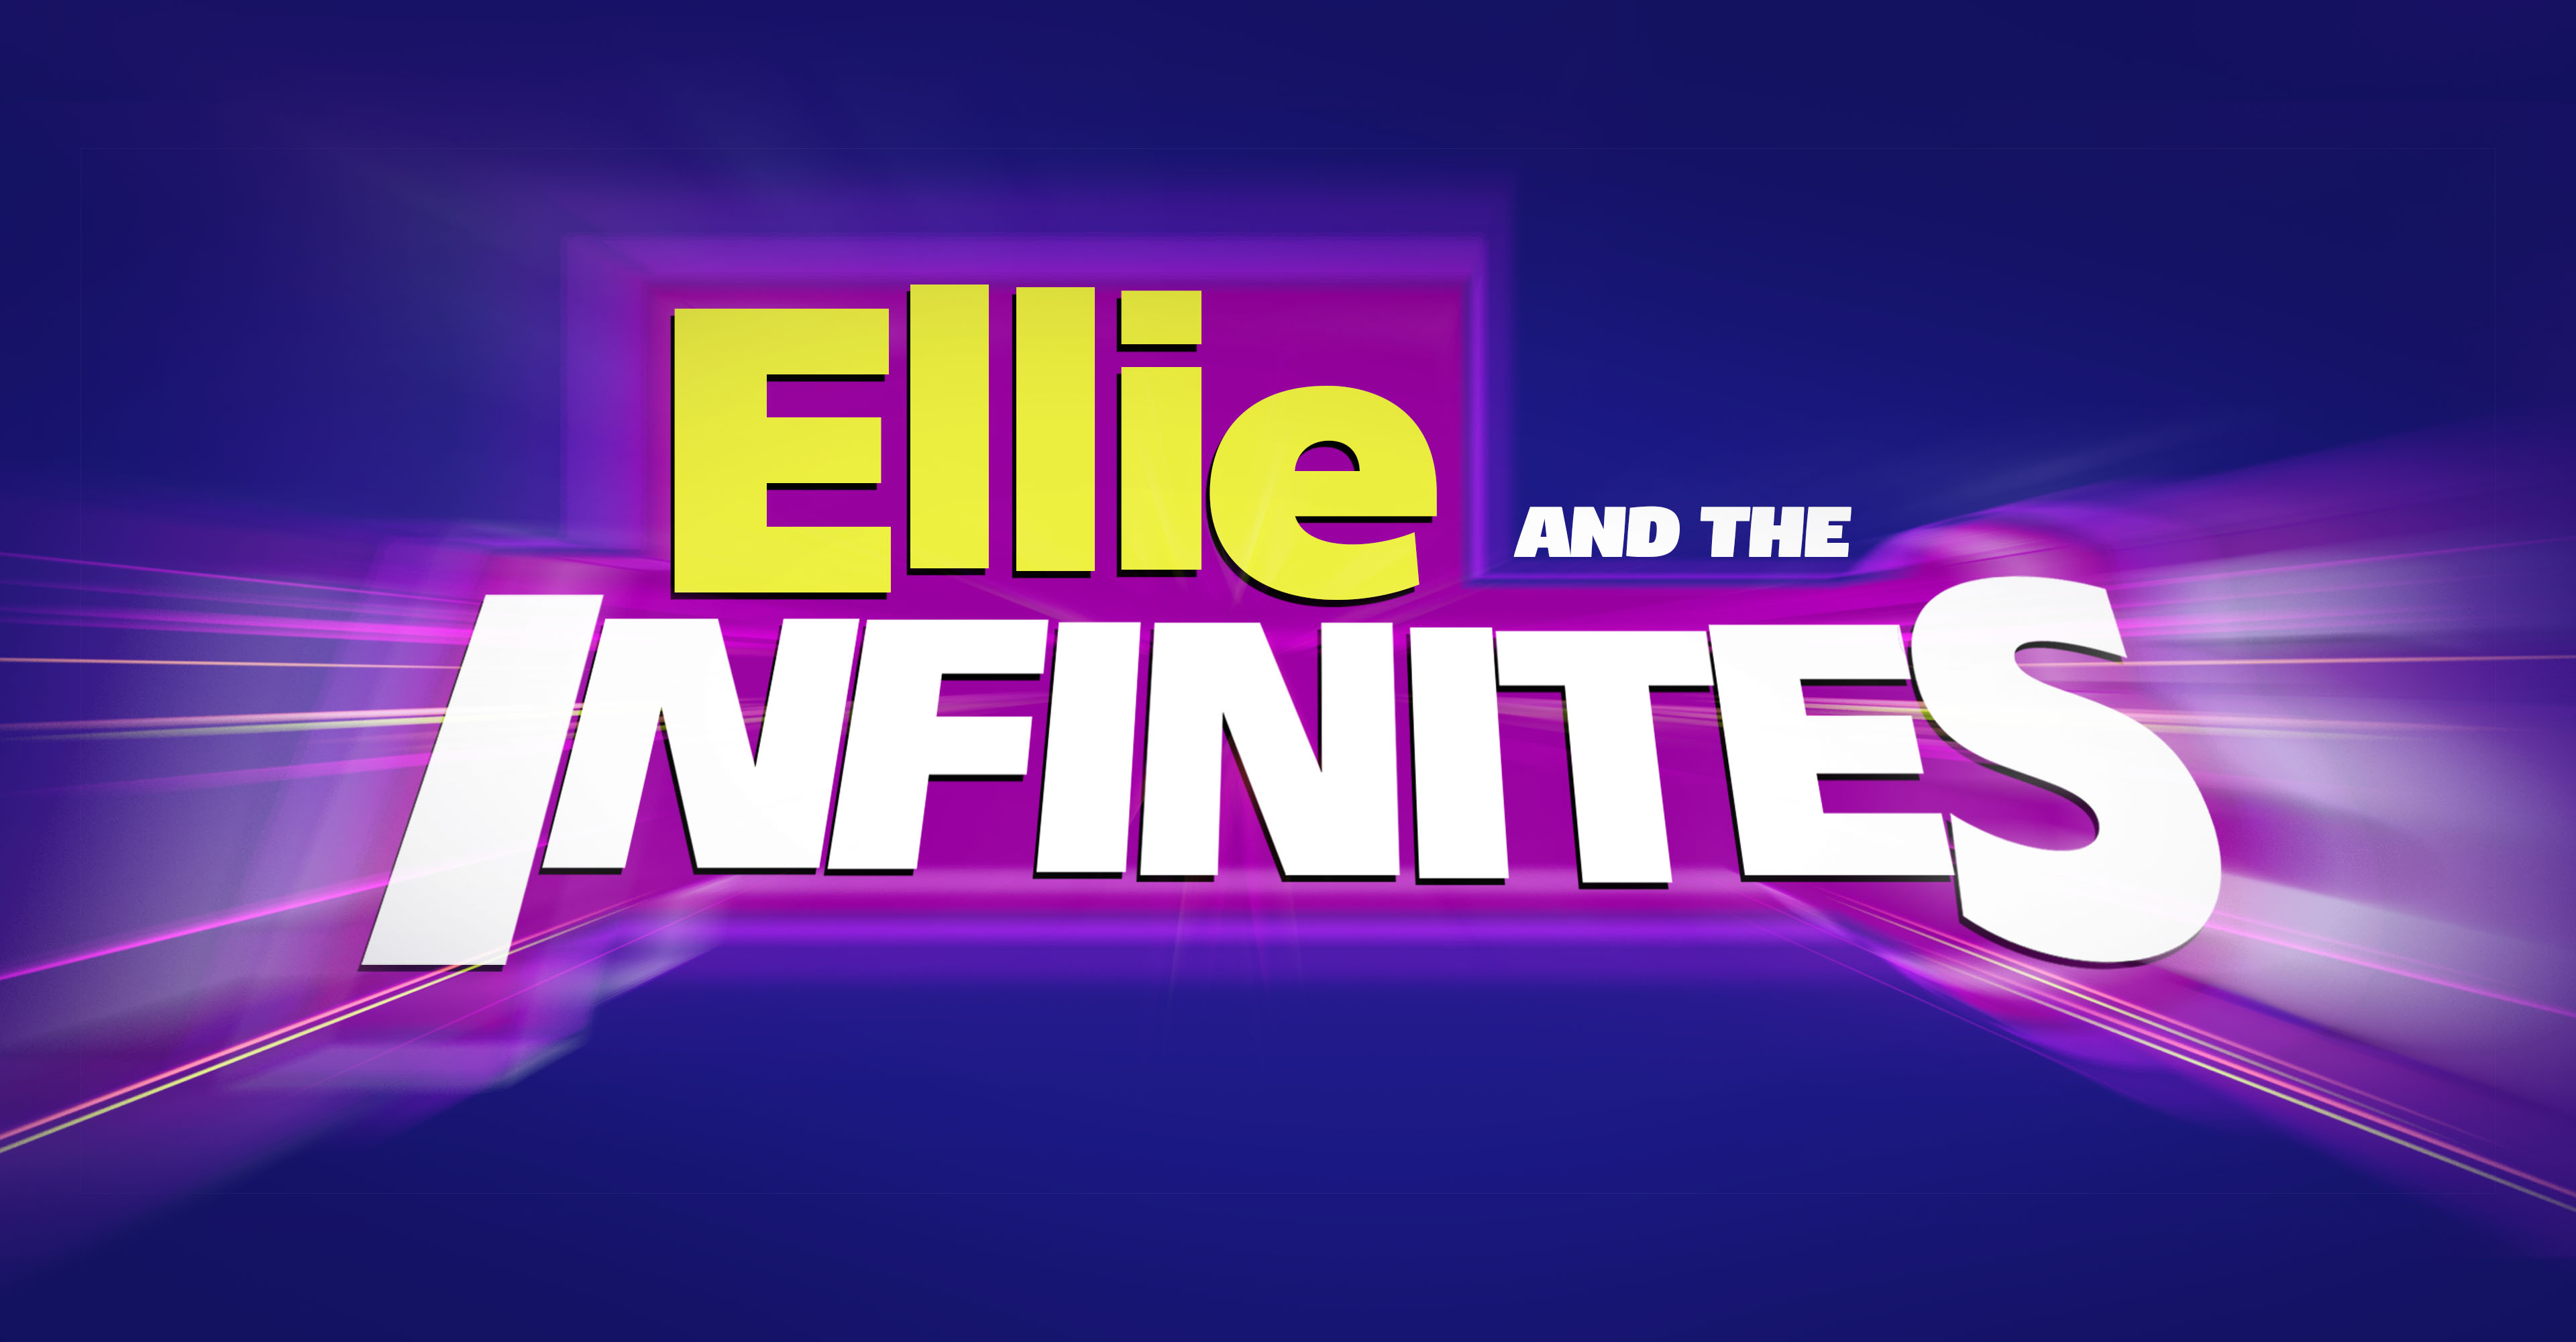 Ellie and the Infinities